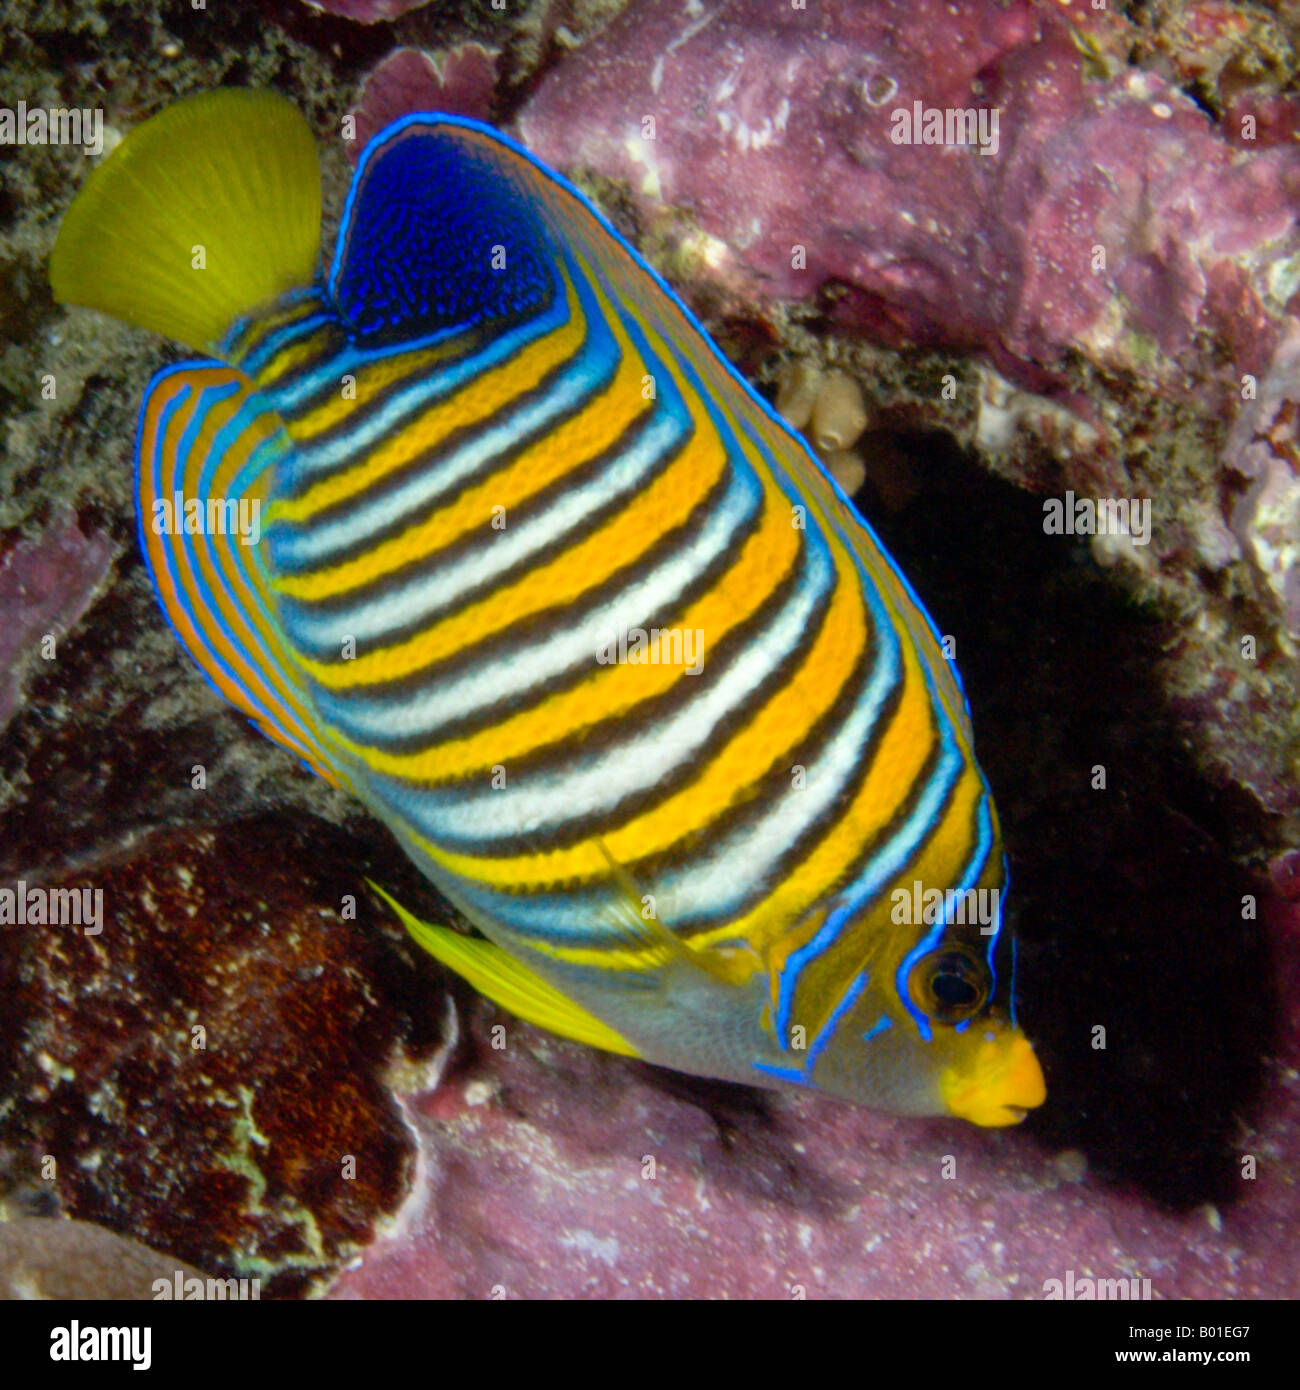 Regal angelfish, Pygoplites diacanthus at The Cod Hole, Ribbon Reef #10, Great Barrier Reef, Australia Stock Photo